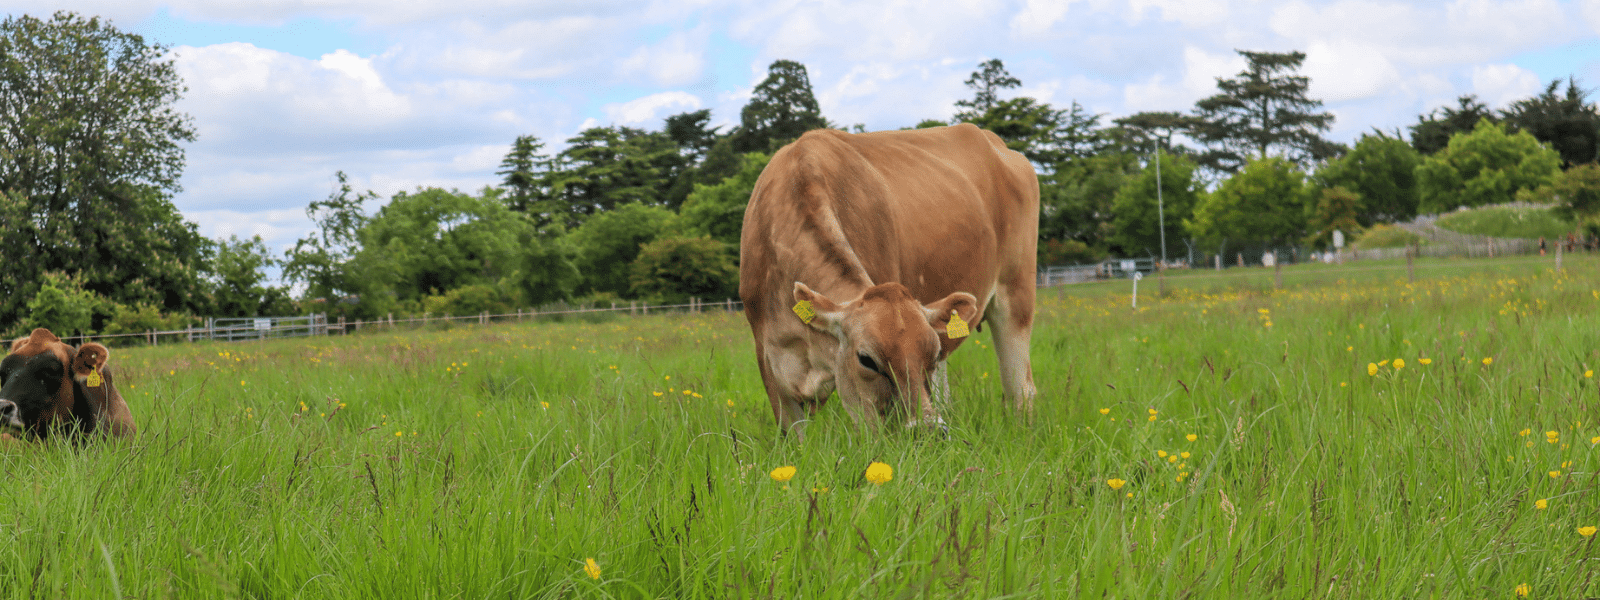 https://www.airfield.ie/wp-content/uploads/2023/03/Jersey-cow-at-Airfield-Dublin.png